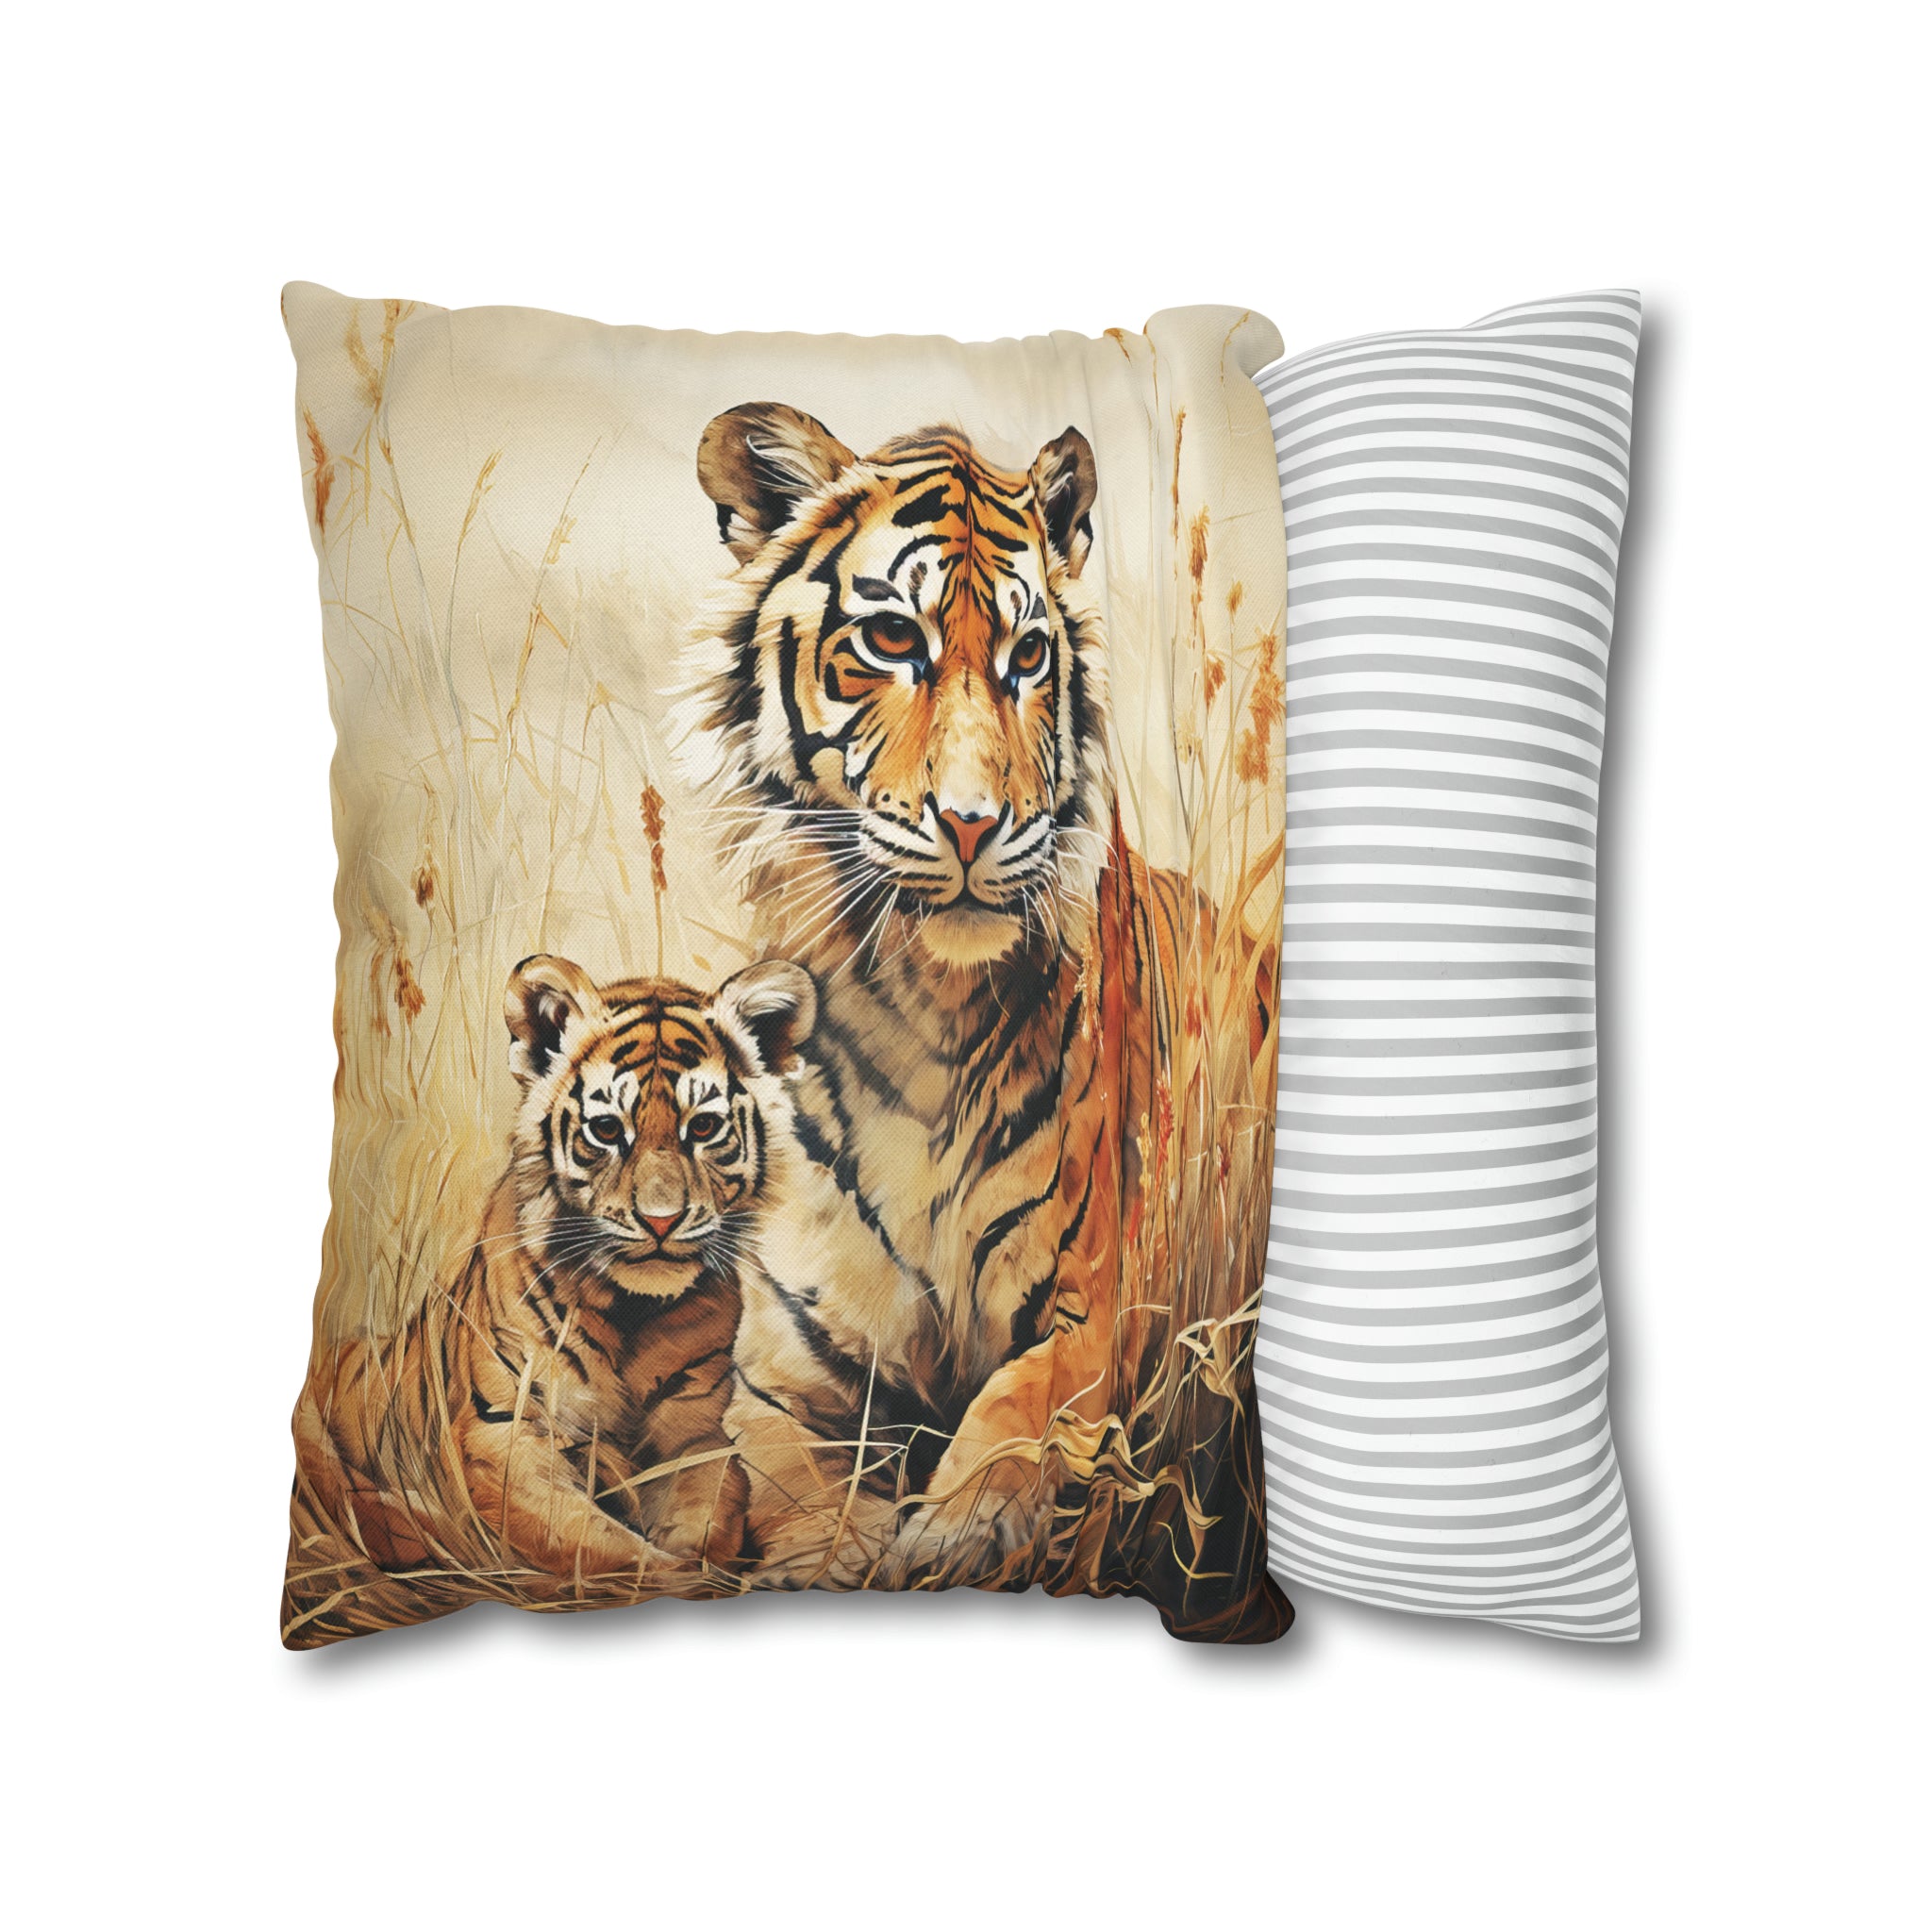 Square Pillow Case 18" x 18", CASE ONLY, no pillow form, original Art ,Colorful, A Mother Tiger and Her Cub in the African Scrub Grass